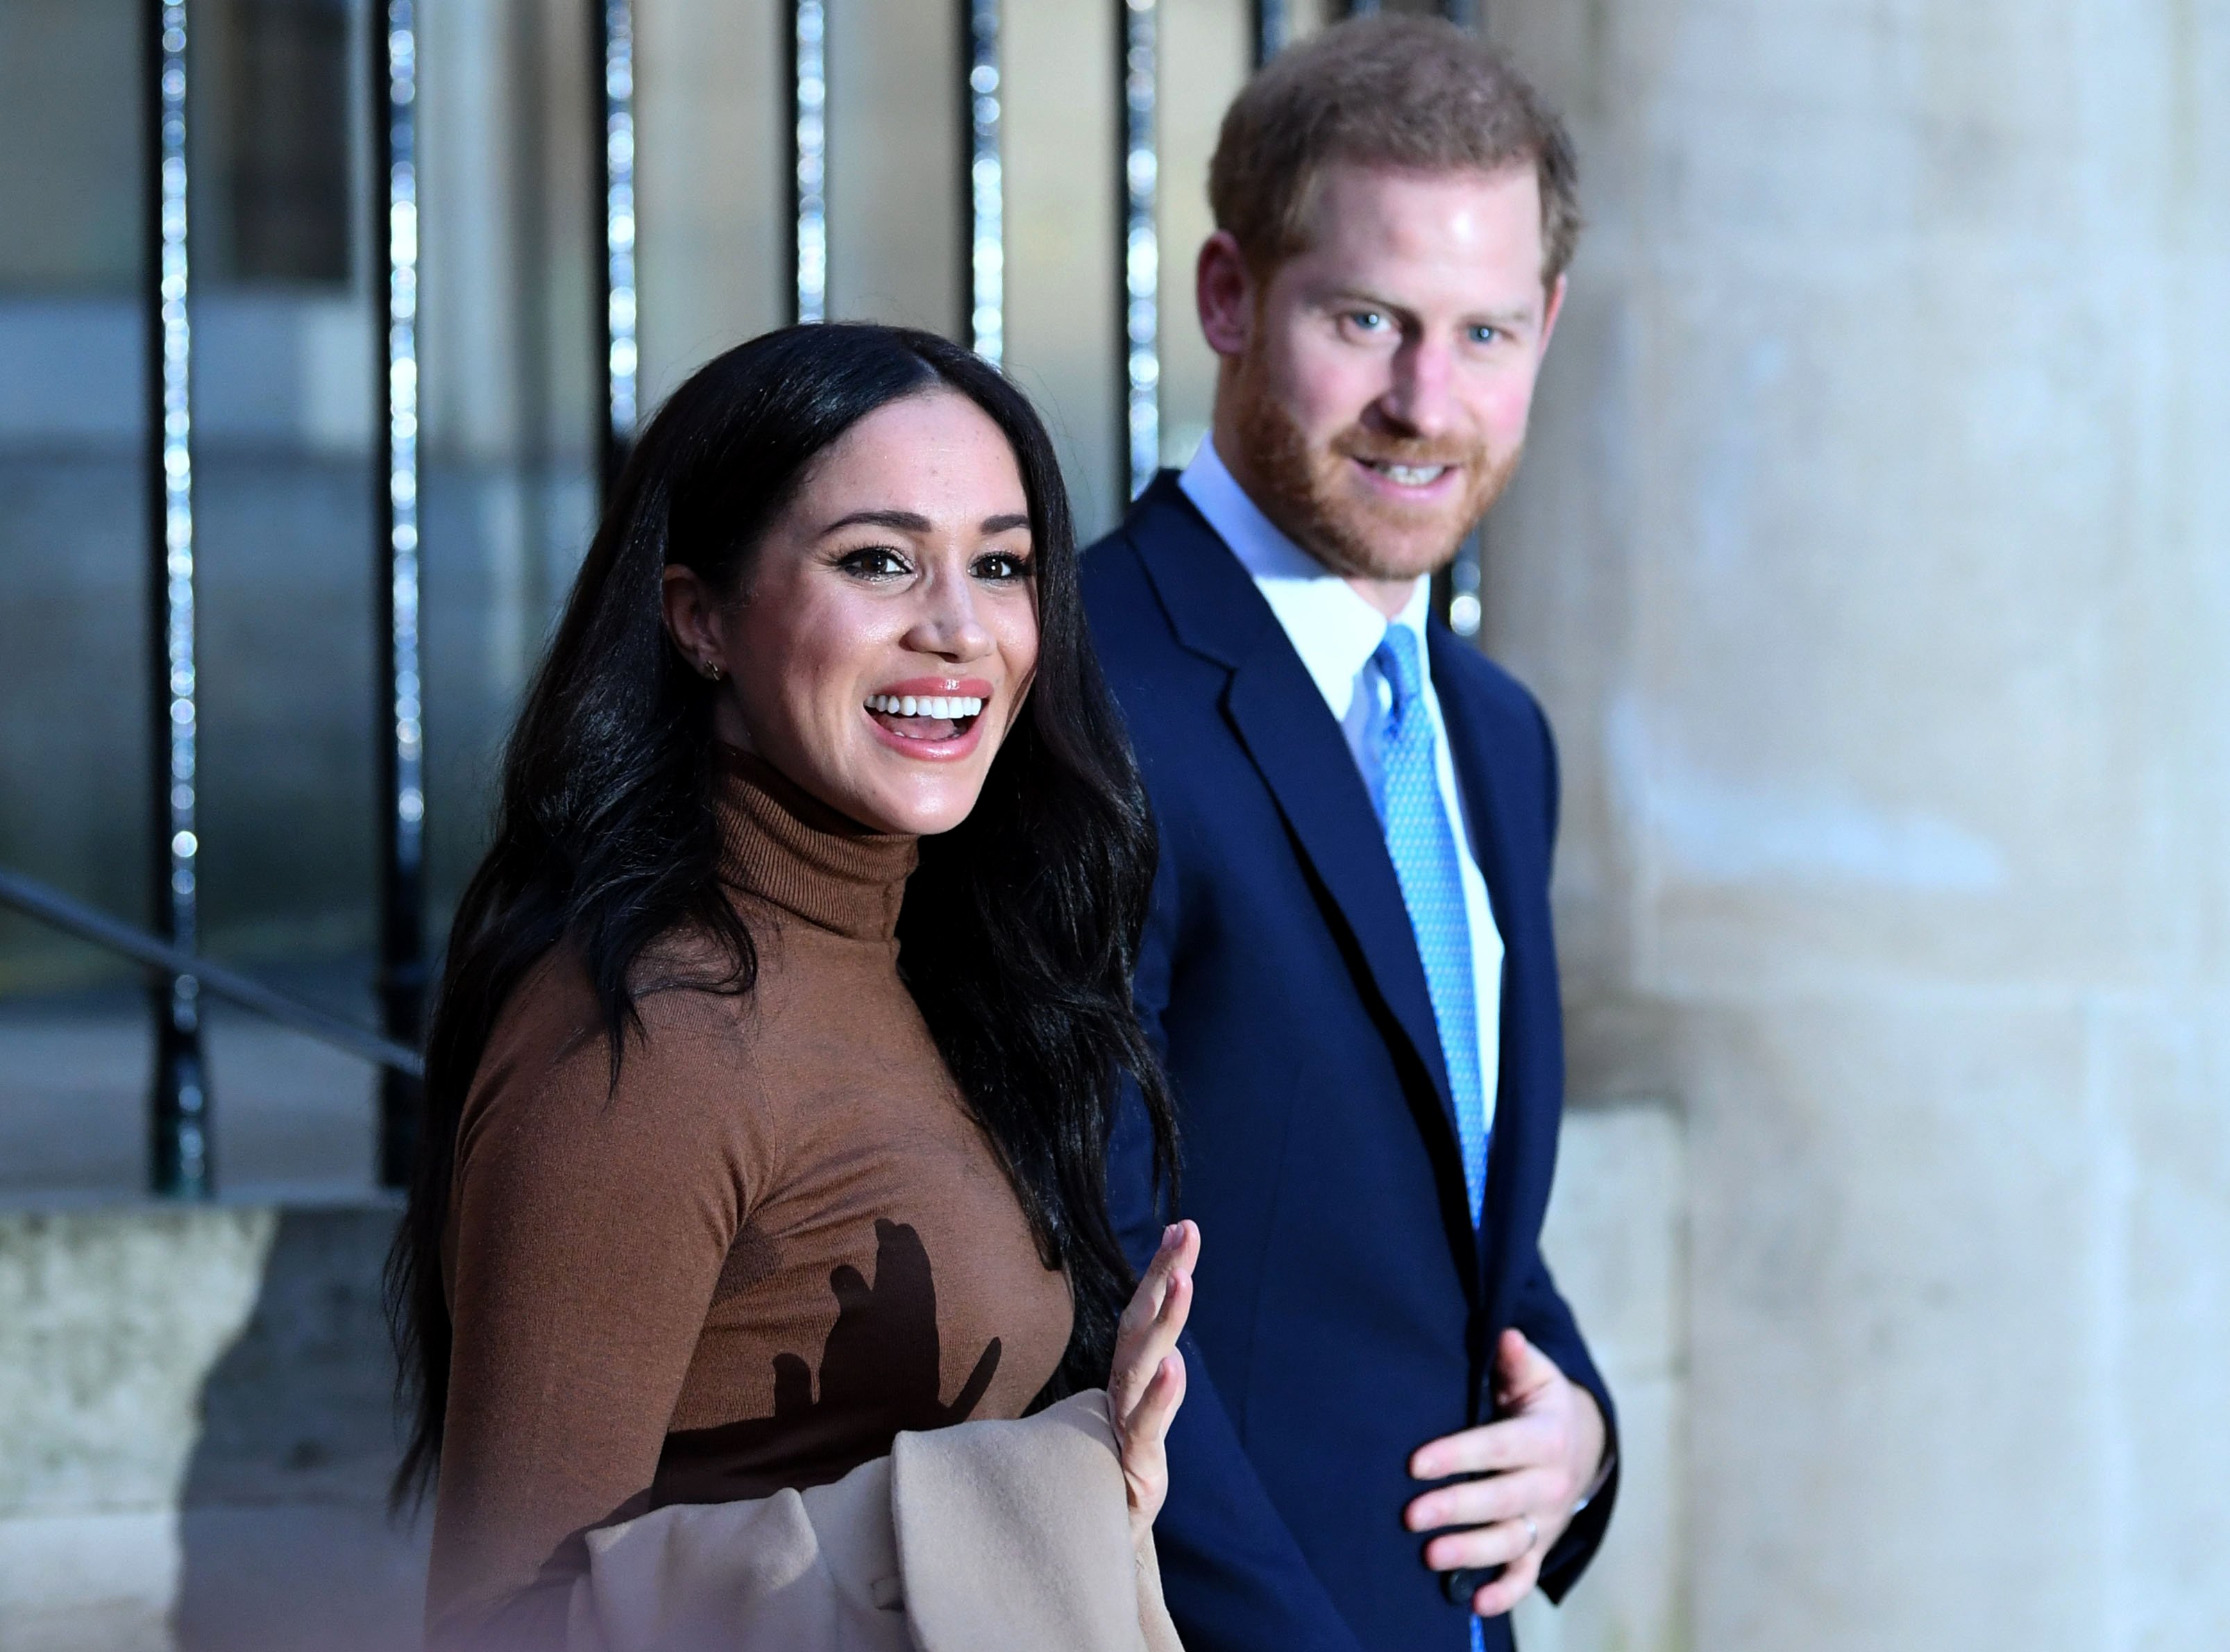 Prince Harry and Meghan Markle after their visit to Canada House on January 7, 2020, in London, England. | Source: Getty Images.